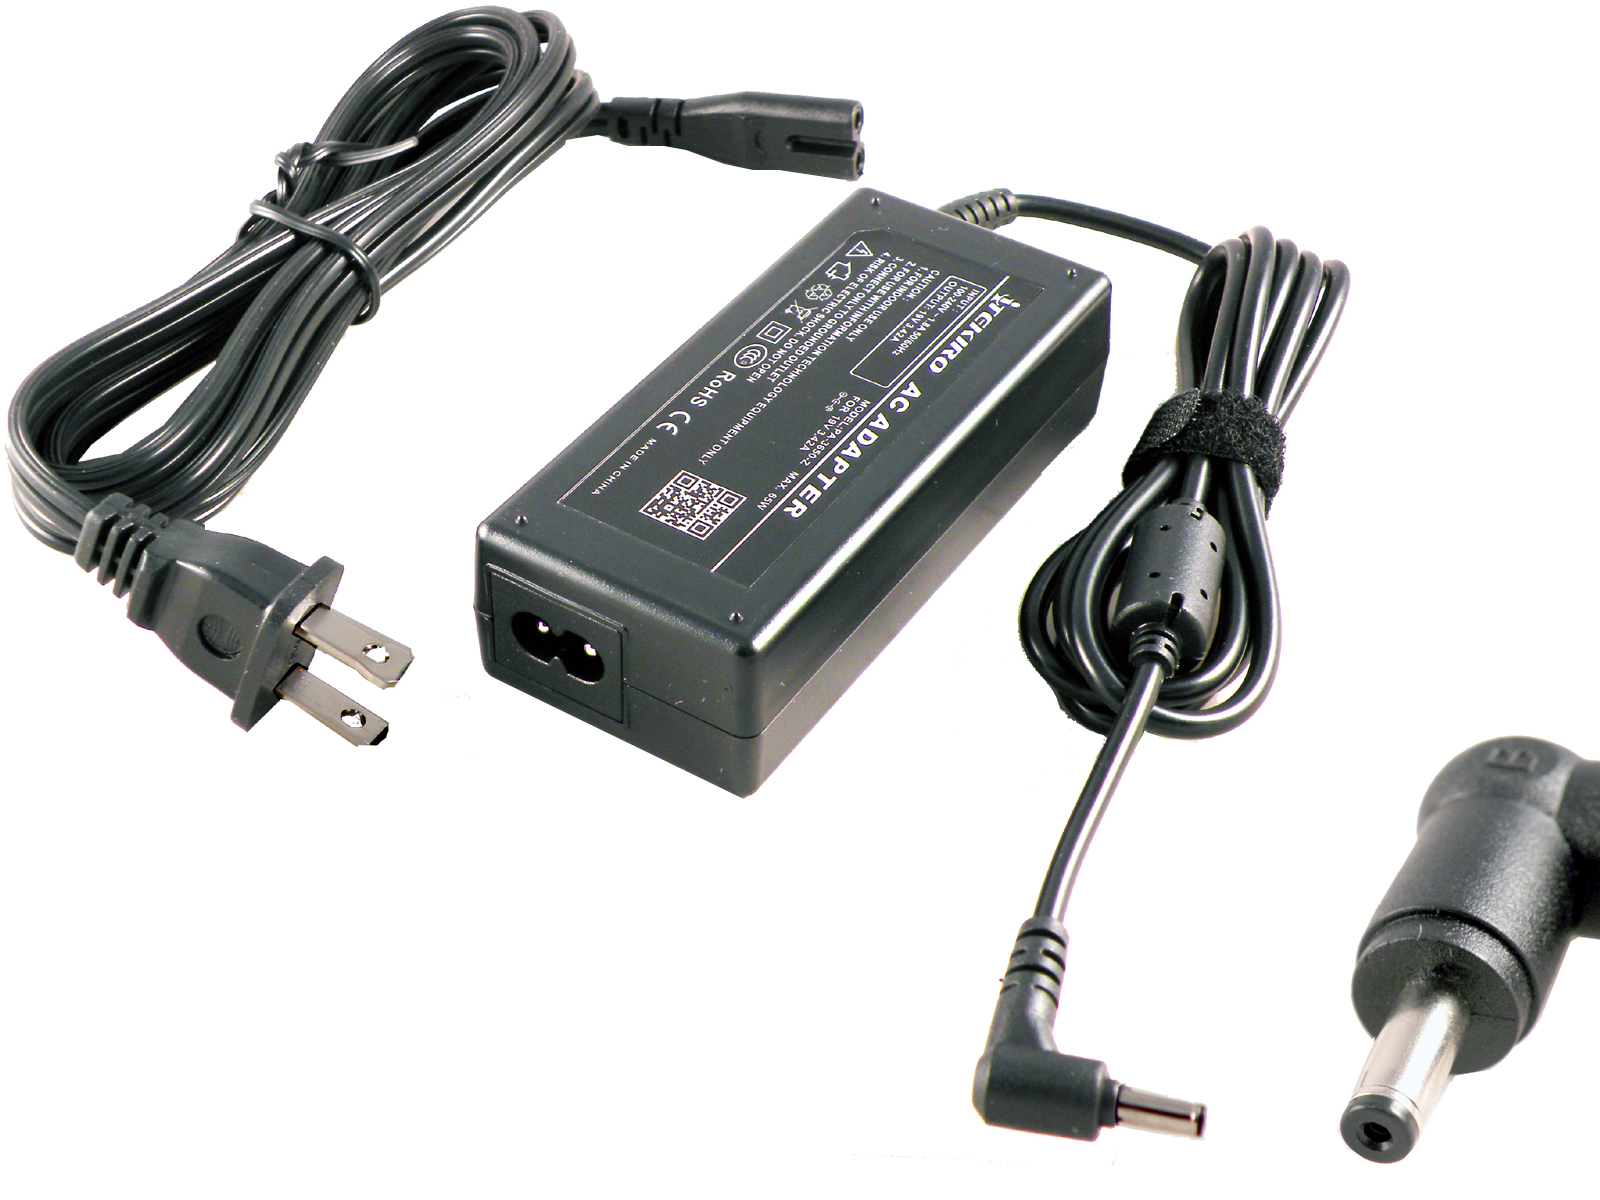 Laptop AC Adapter for Asus F505ZA-DB31 F505ZA-DH51 F510QA F510QA-WB91 F512DA F512DA-DB34 F512DA-EB51 F512DA-EB55 F512DA-EB55-BL F512DA-EB55-CL F512DA-EB55-SL F512DA-PB31 F512DA-PB31-BL F512DA-PB31-CL - image 2 of 6